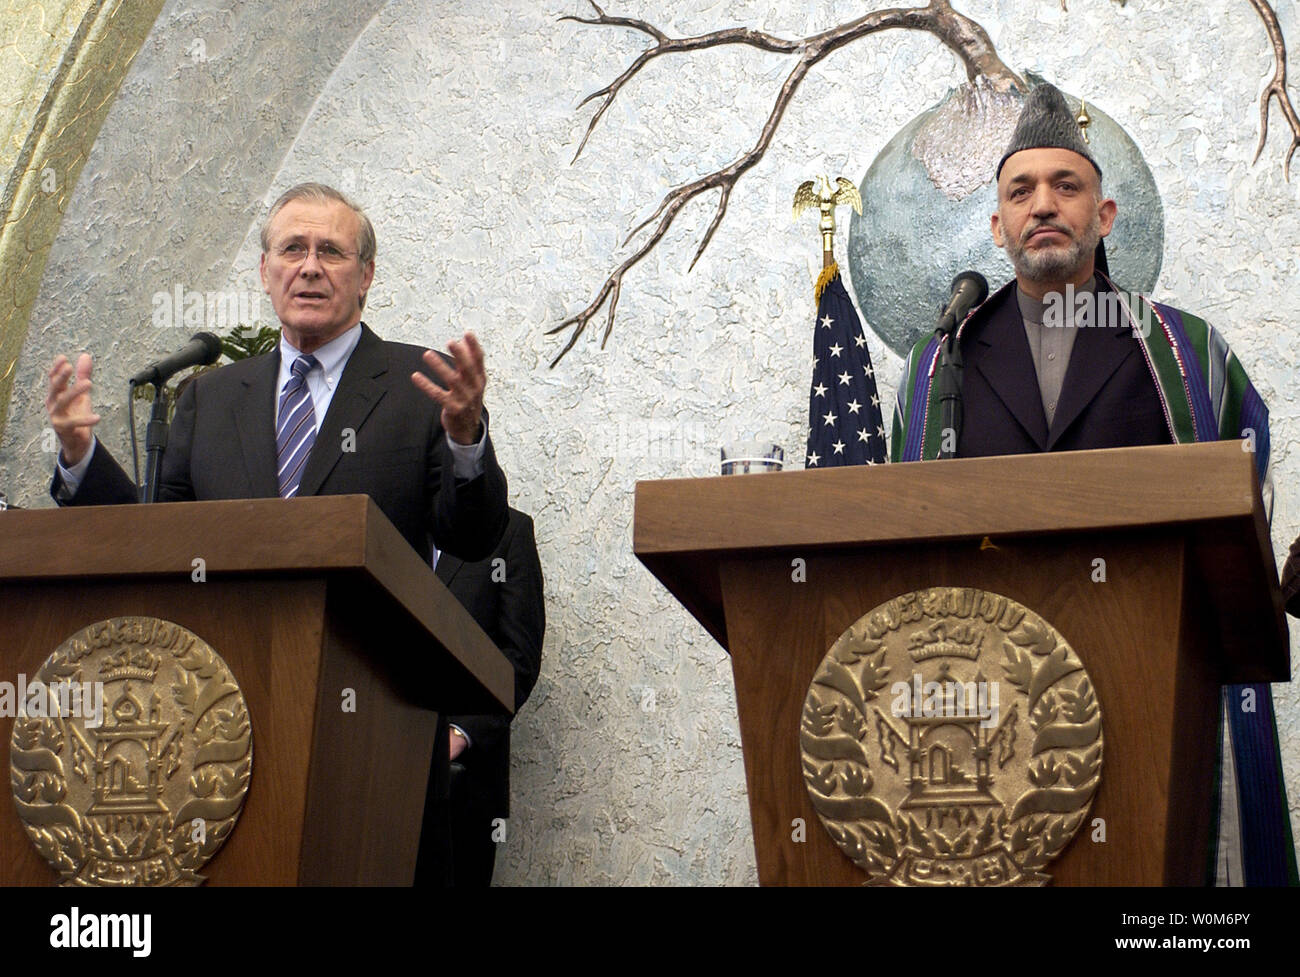 Secretary of Defense Donald H. Rumsfeld, left, and with President of Afghanistan Hamid Karzai conduct a press conference at the presidential palace in Kabul, Afghanistan on April 13, 2005.  Rumsfeld visited Afghanistan during a tour of the middle-east including visits to Kurdistan, Azerbaijan and Iraq where he met with troops and key government officials including the newly-elected members of the Iraqi government.  (UPI Photo/ Cherie A. Thurlby/Air Force) Stock Photo